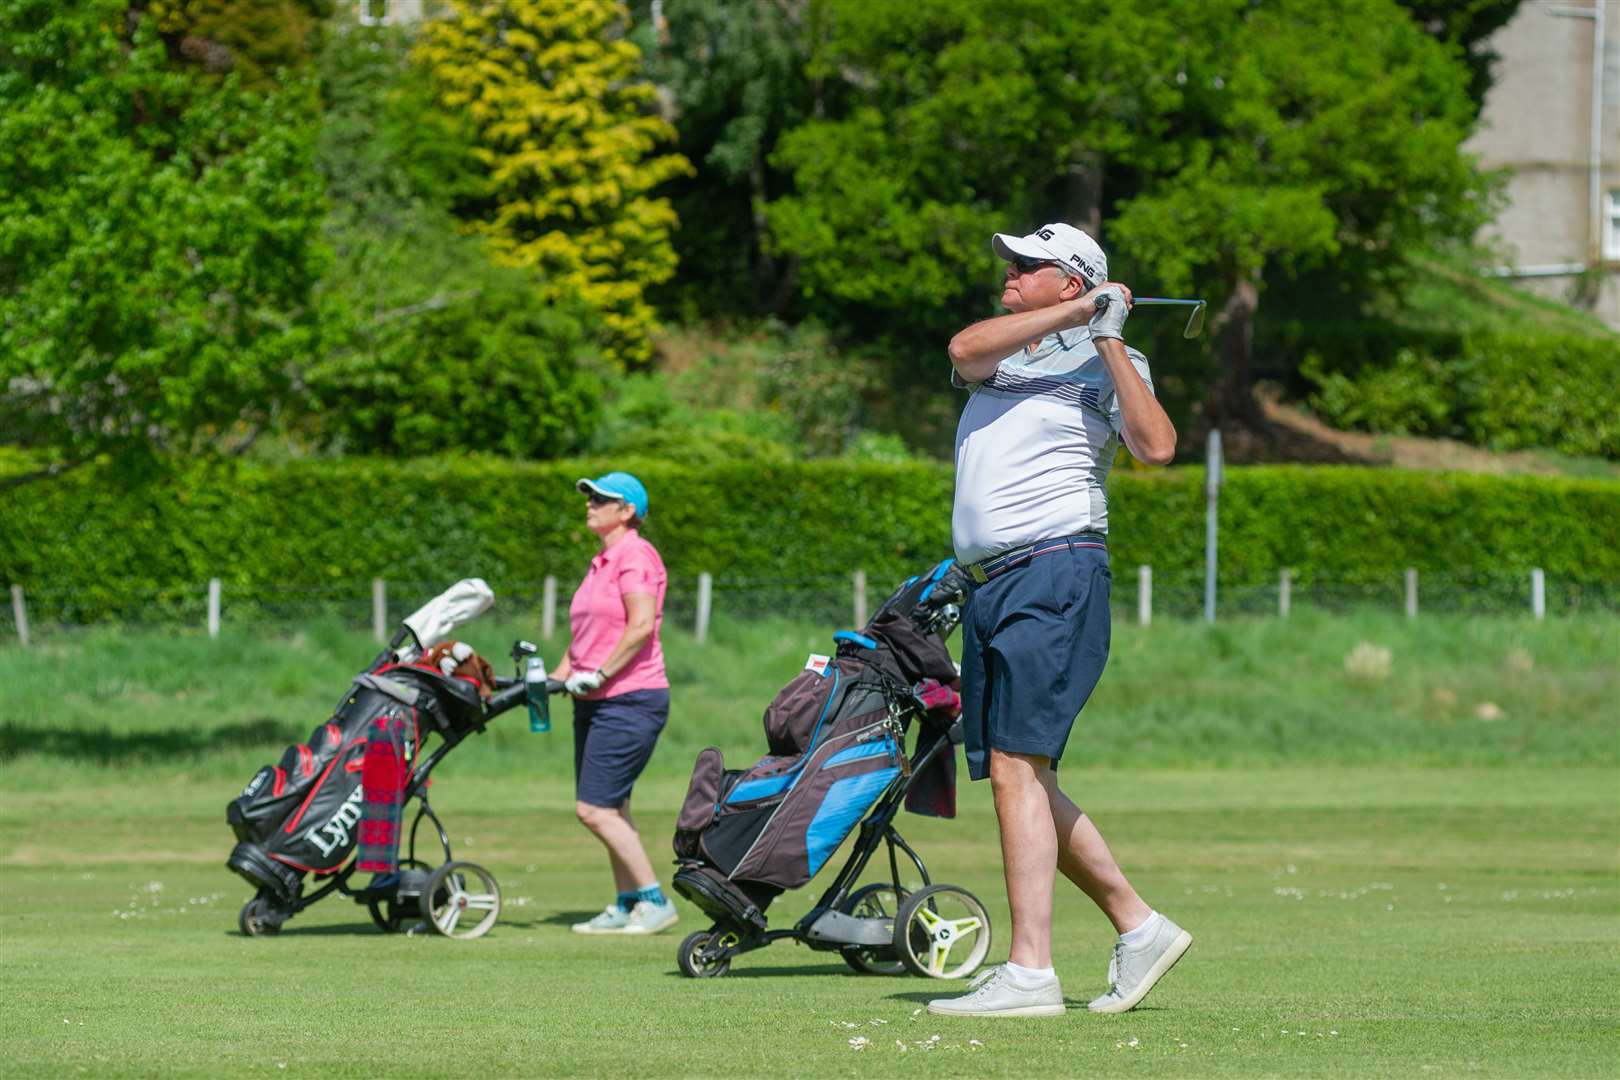 More than 300 players returned to Forres Golf Club over the weekend as lockdown restrictions were eased across the country.